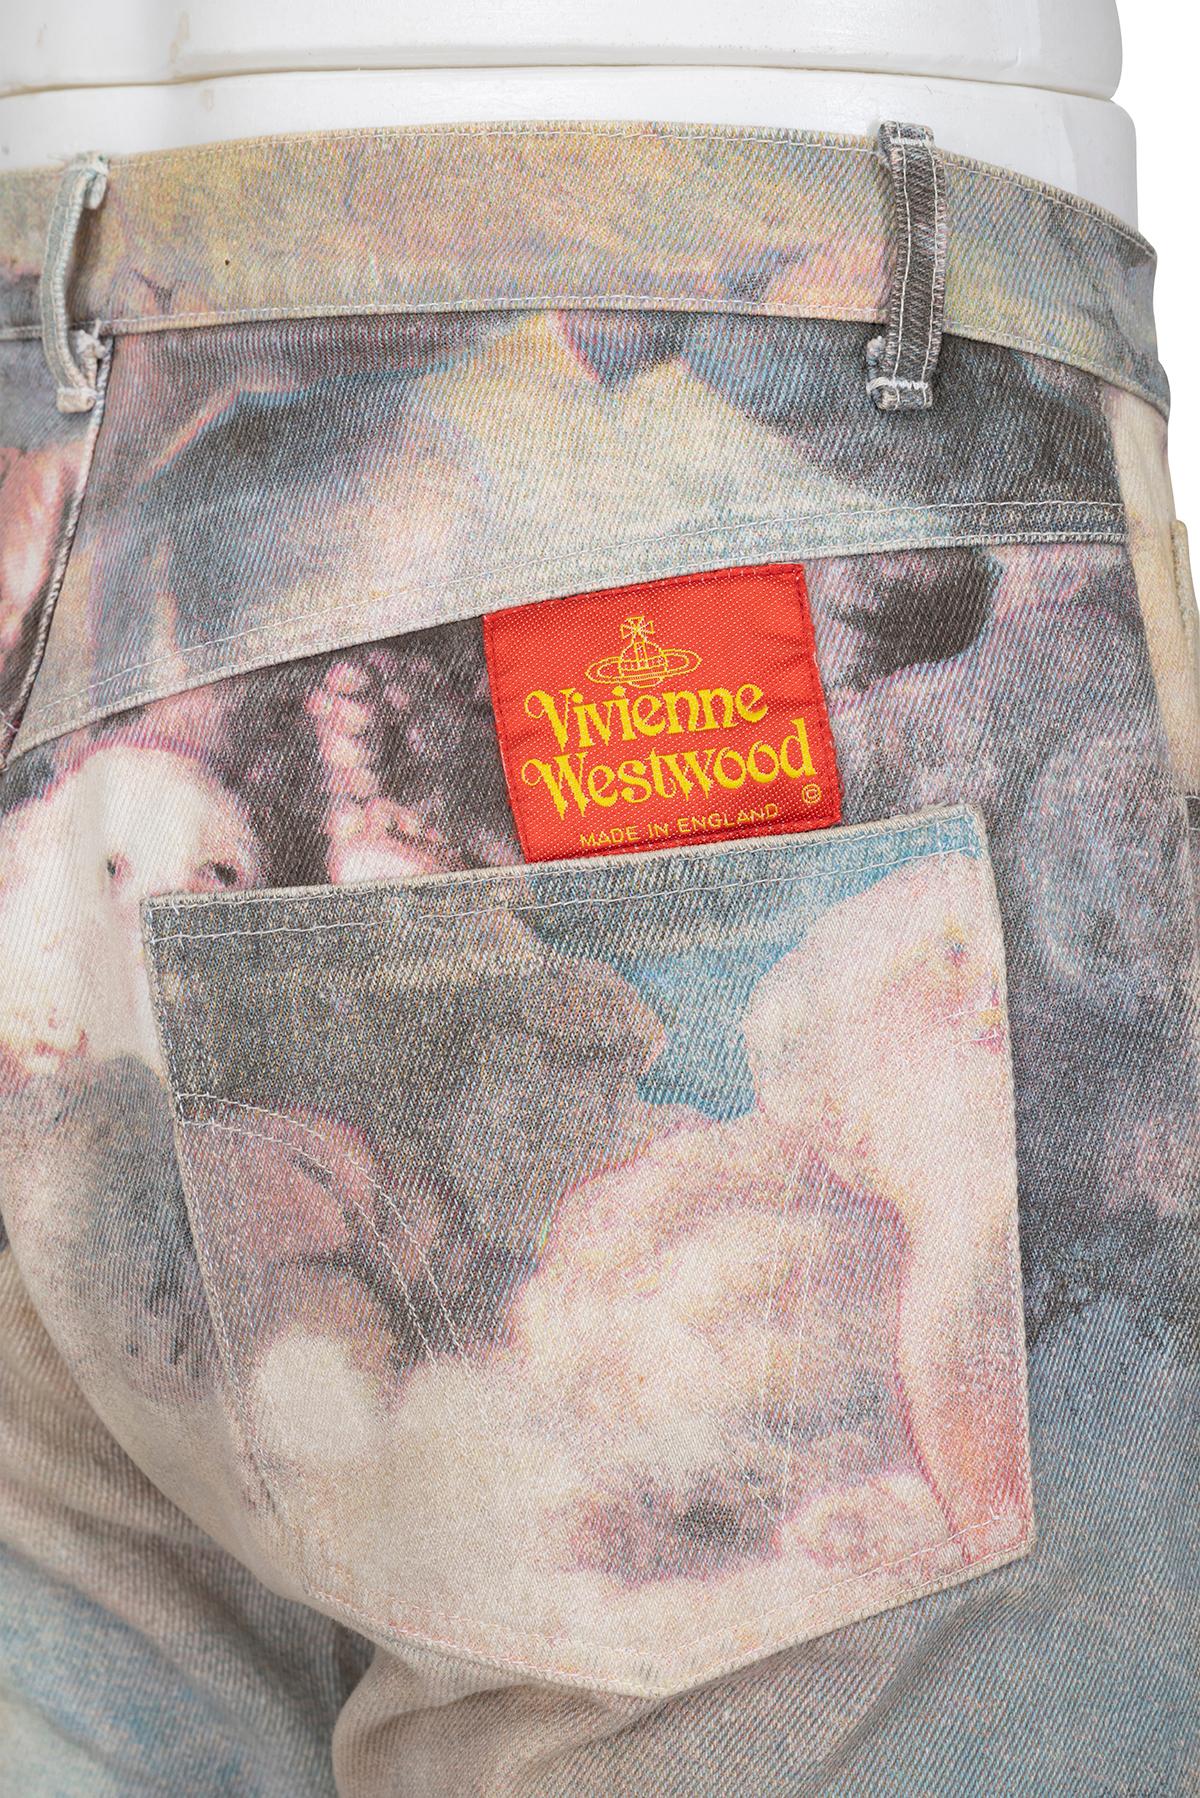 VIVIENNE WESTWOOD FW 91 Iconic and Rare 